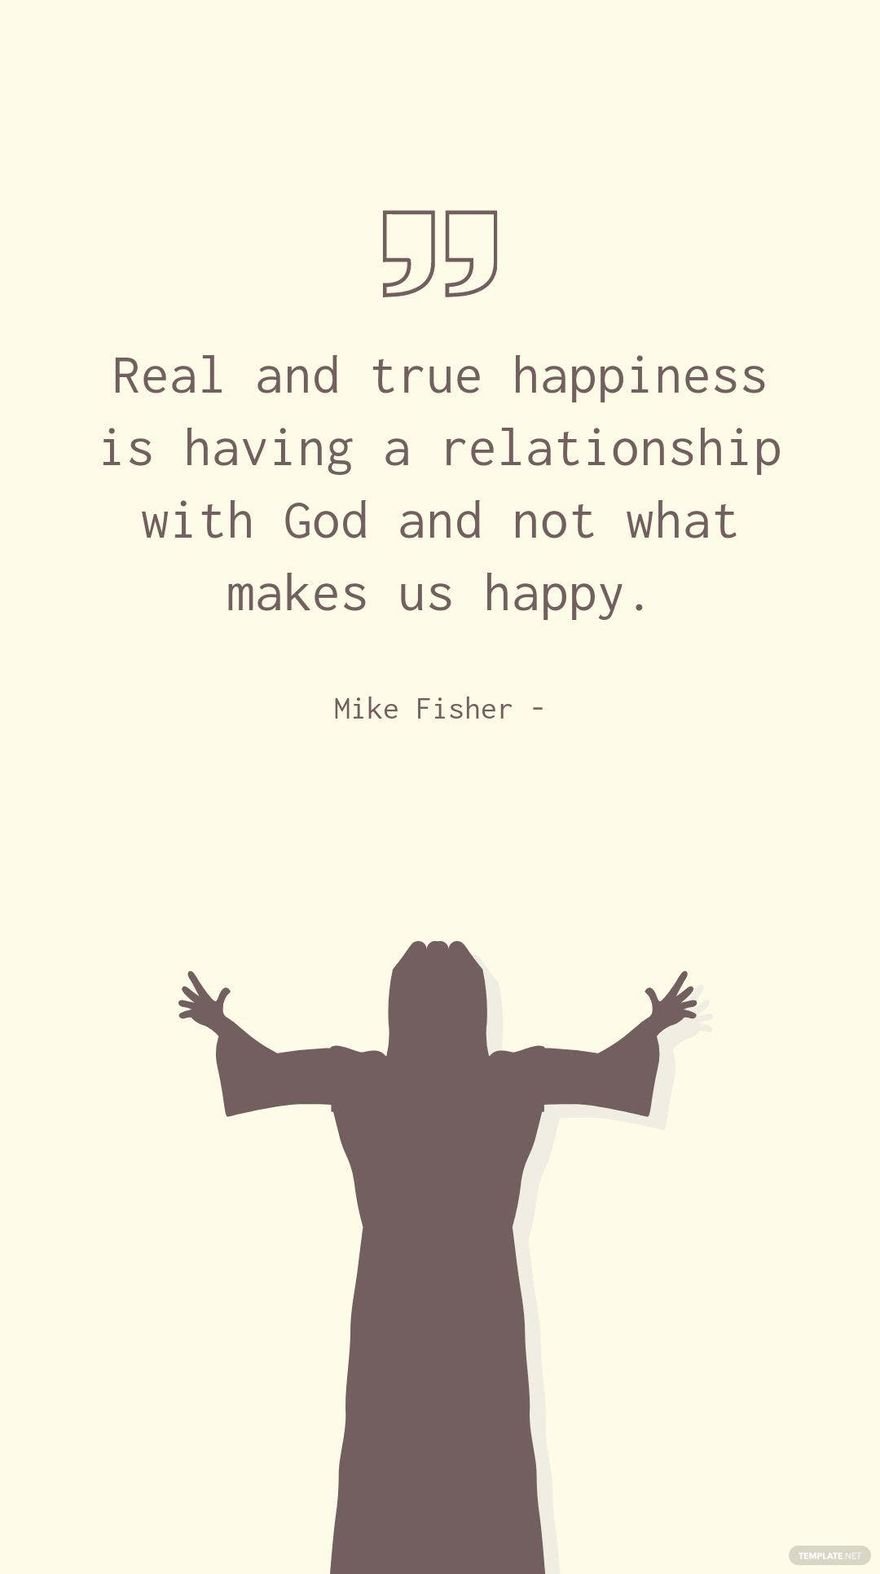 Mike Fisher - Real and true happiness is having a relationship with God and not what makes us happy.